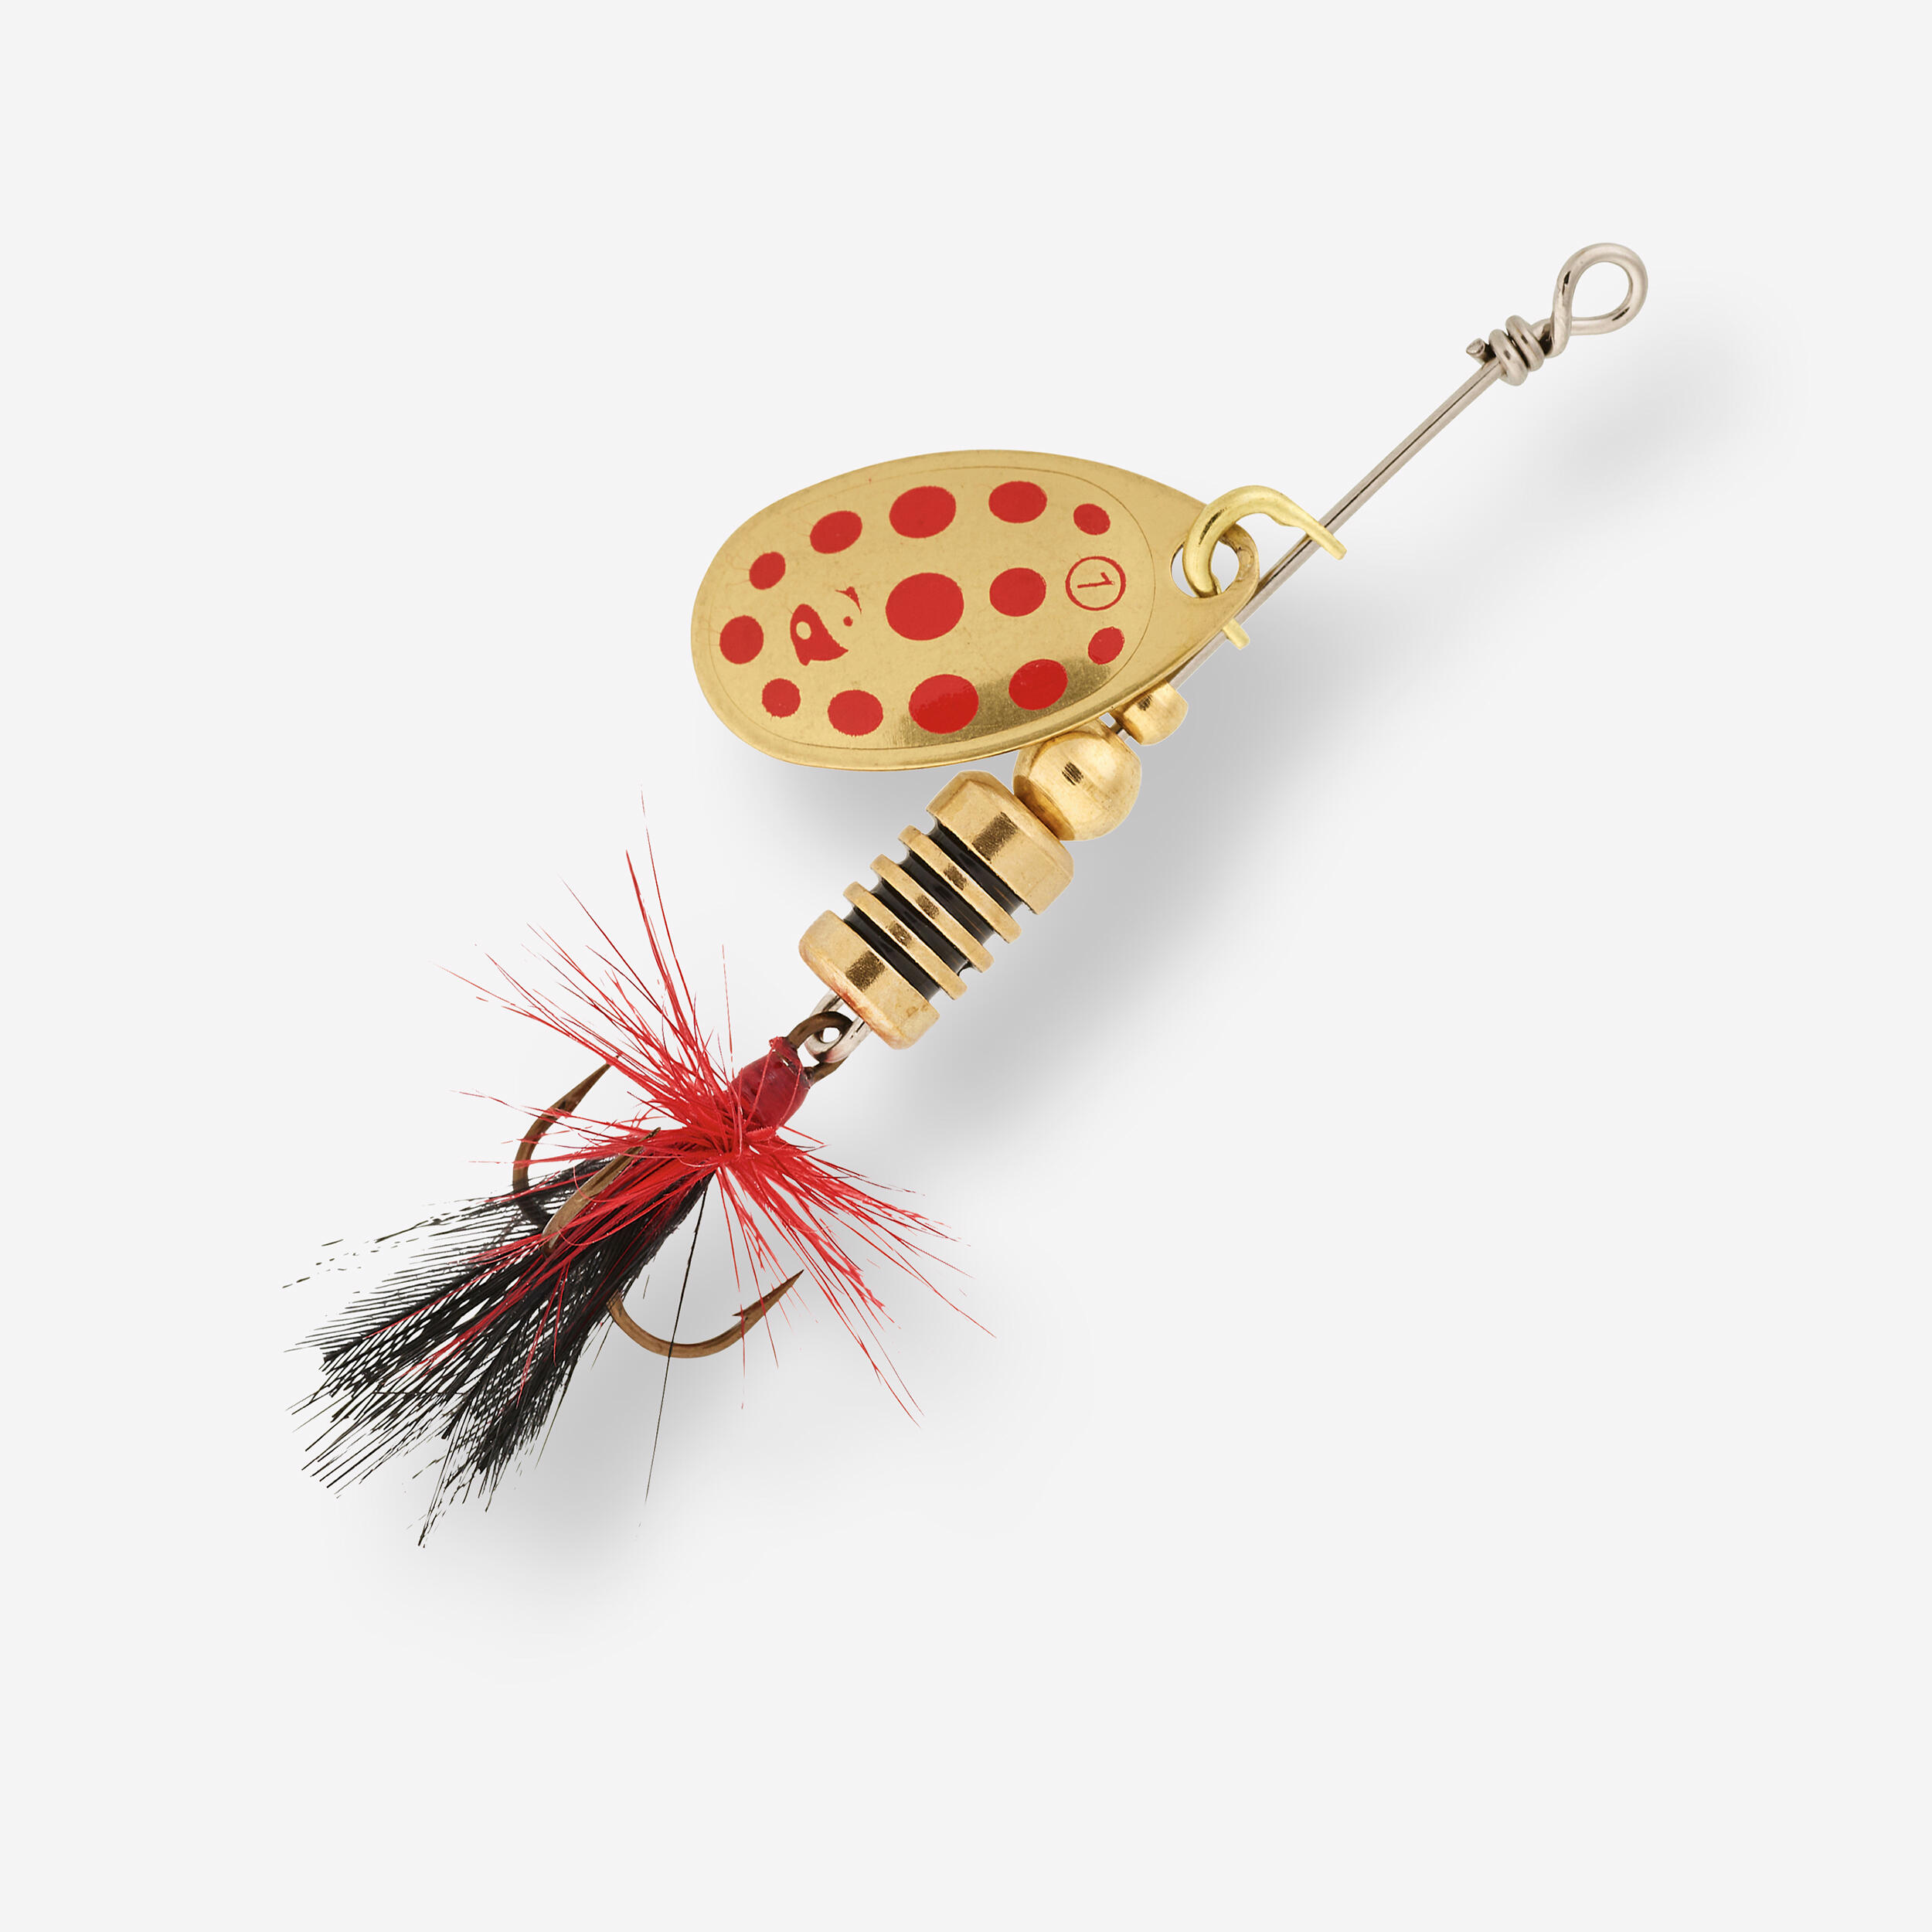 LURE FISHING SPINNING SPOON WETA F #1 - GOLD RED DOTS - Fluo